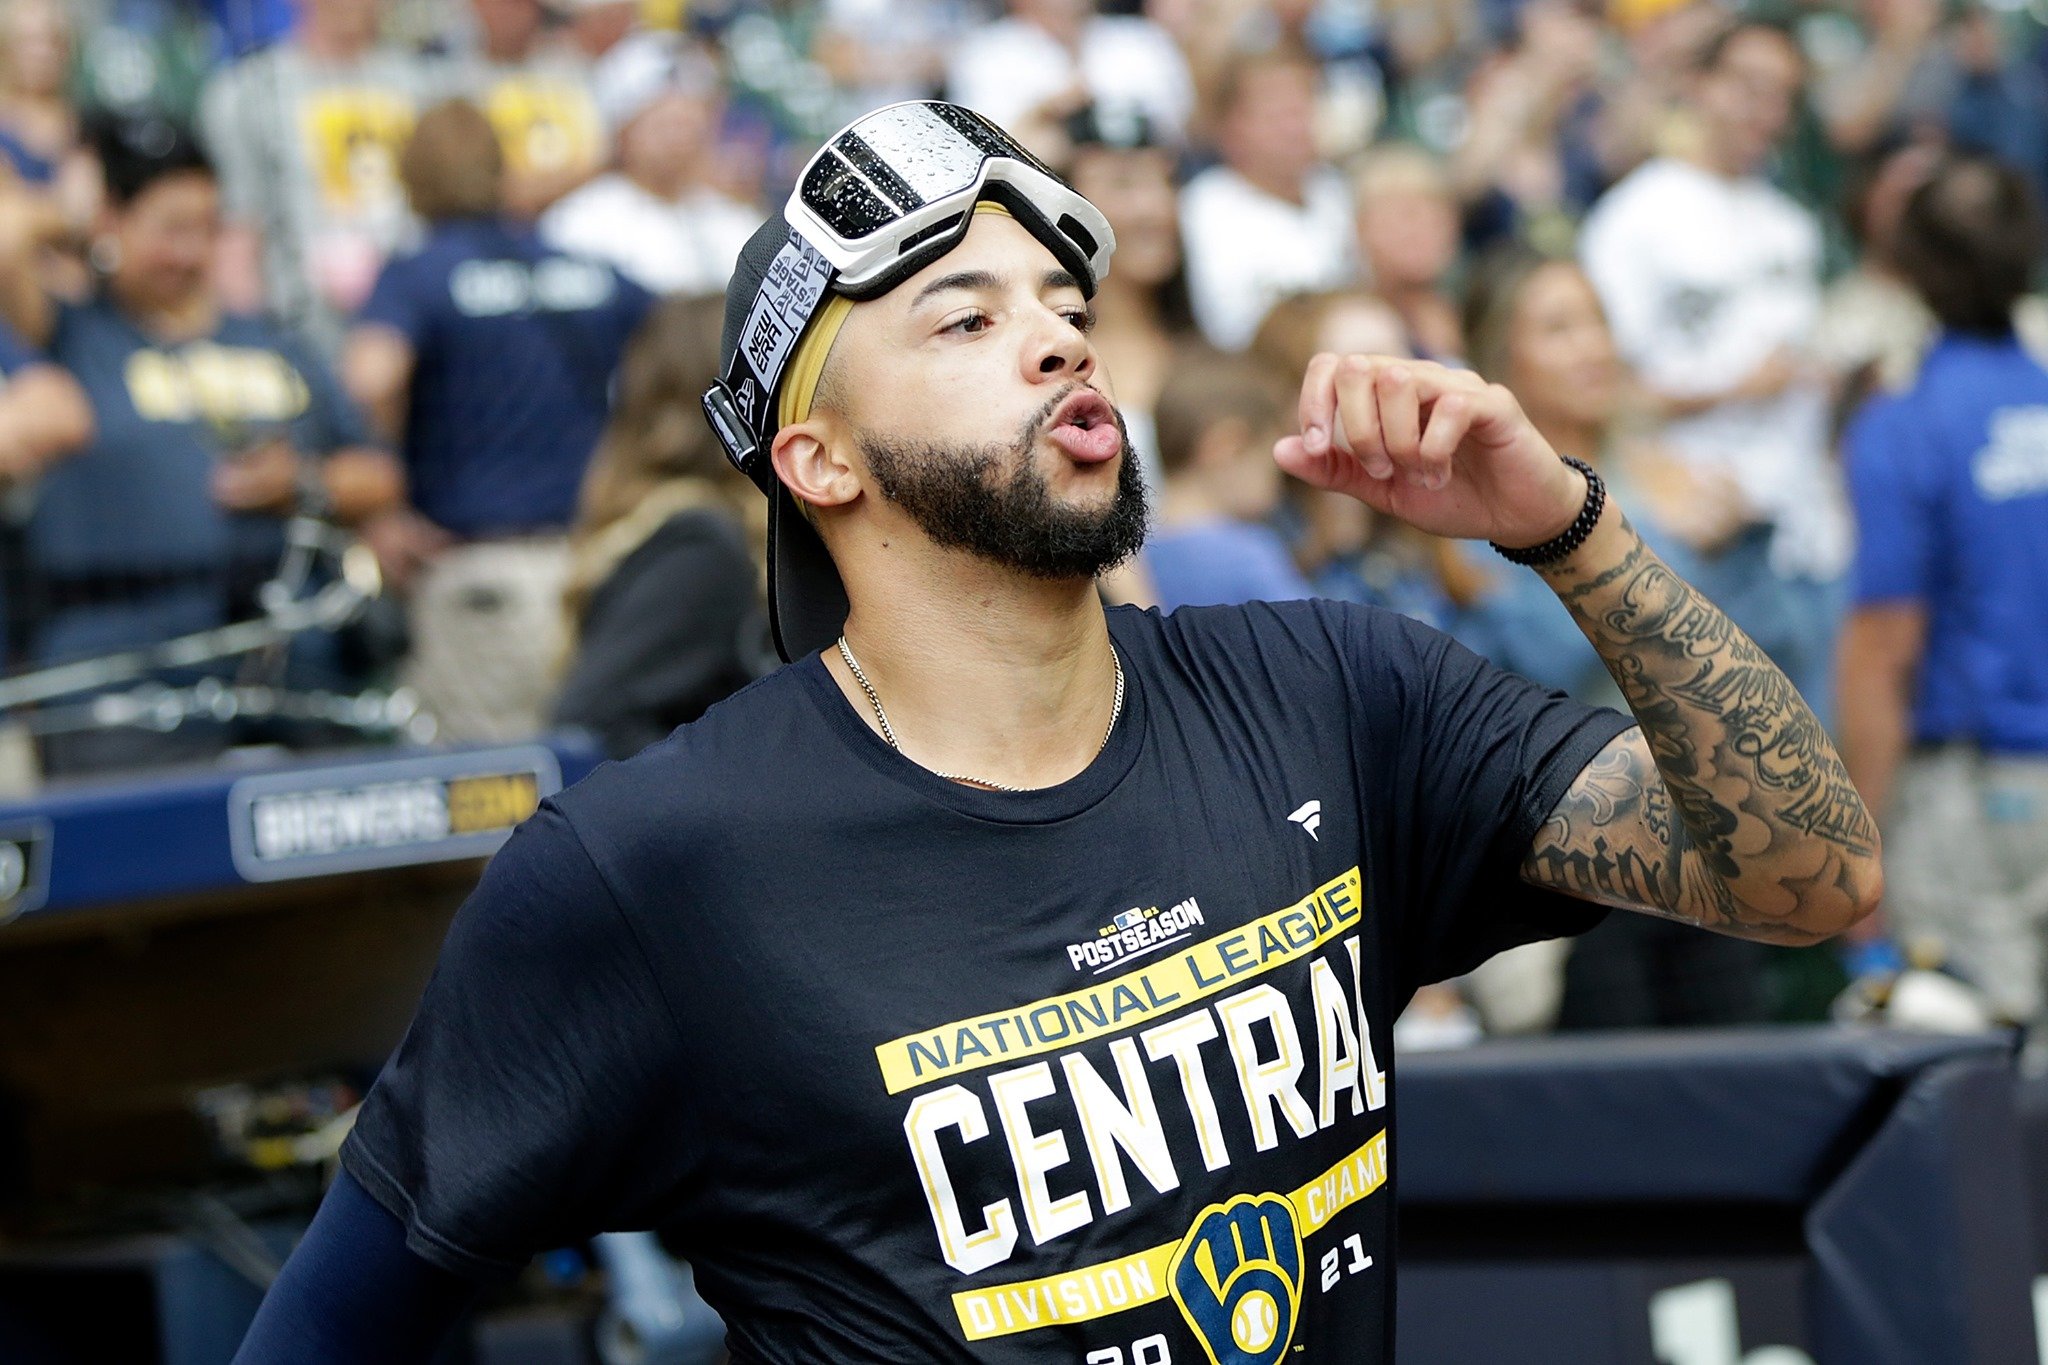 Brewers pitcher punches wall celebrating playoff berth, likely to miss